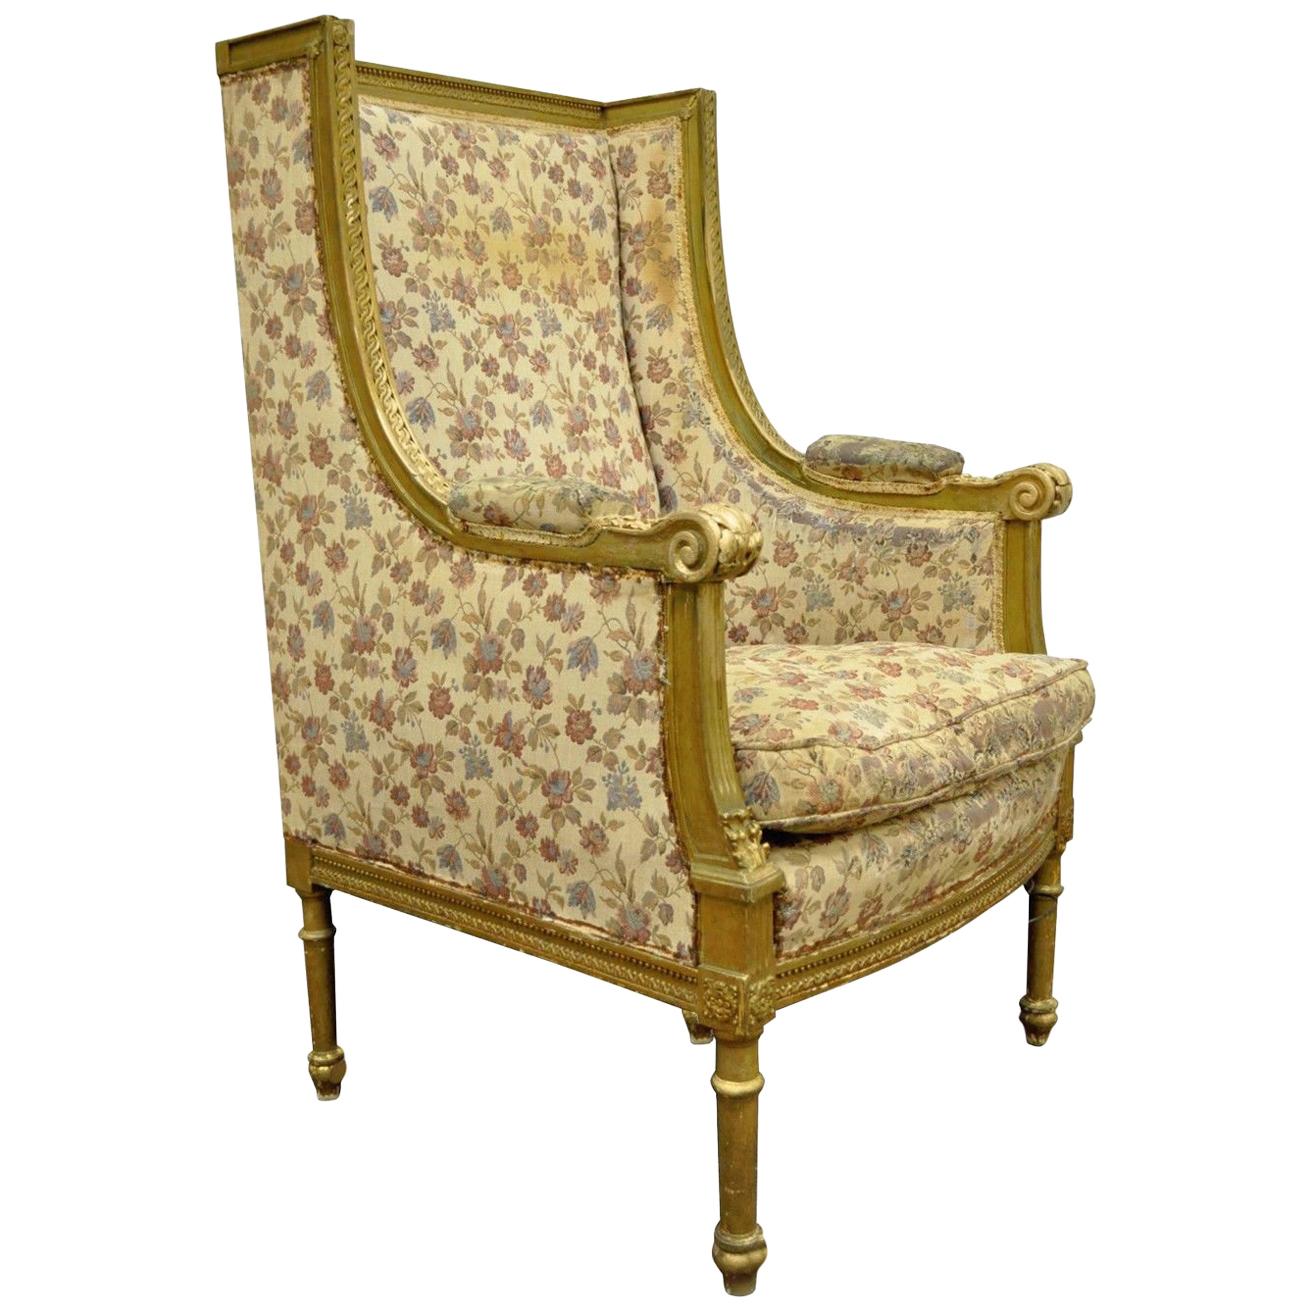 Antique French Louis XVI Victorian Gold Giltwood Wing Back Bergere Armchair